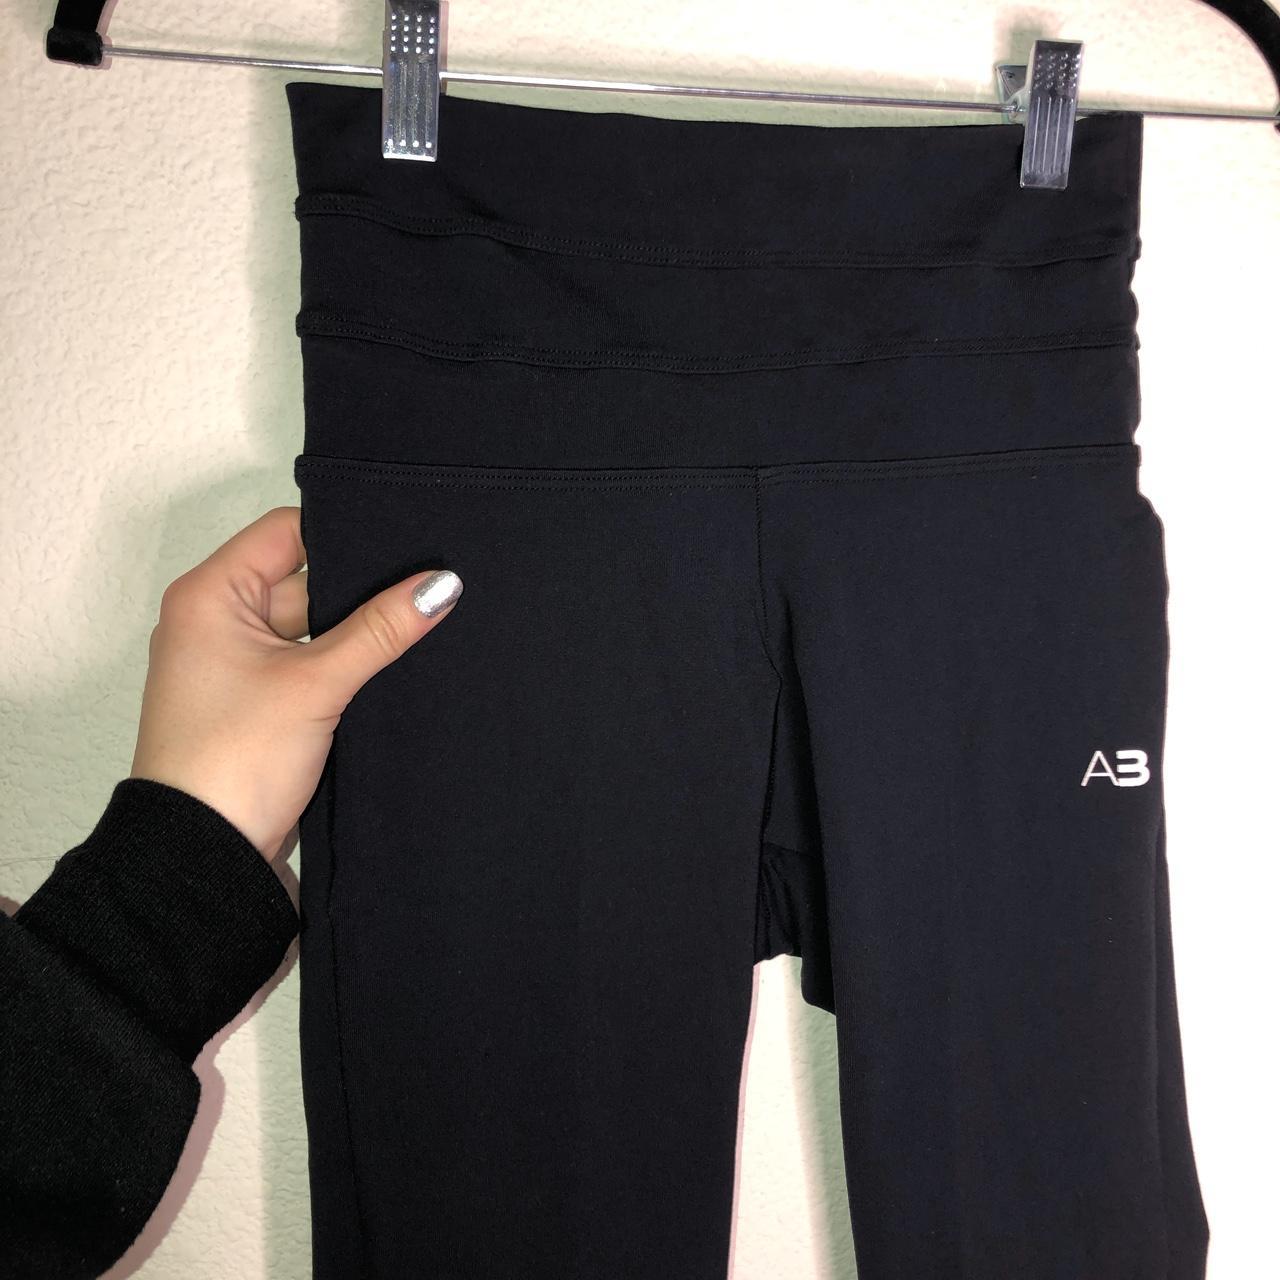 Acai Berry Sexy Black Leggings Size Small, Made in - Depop